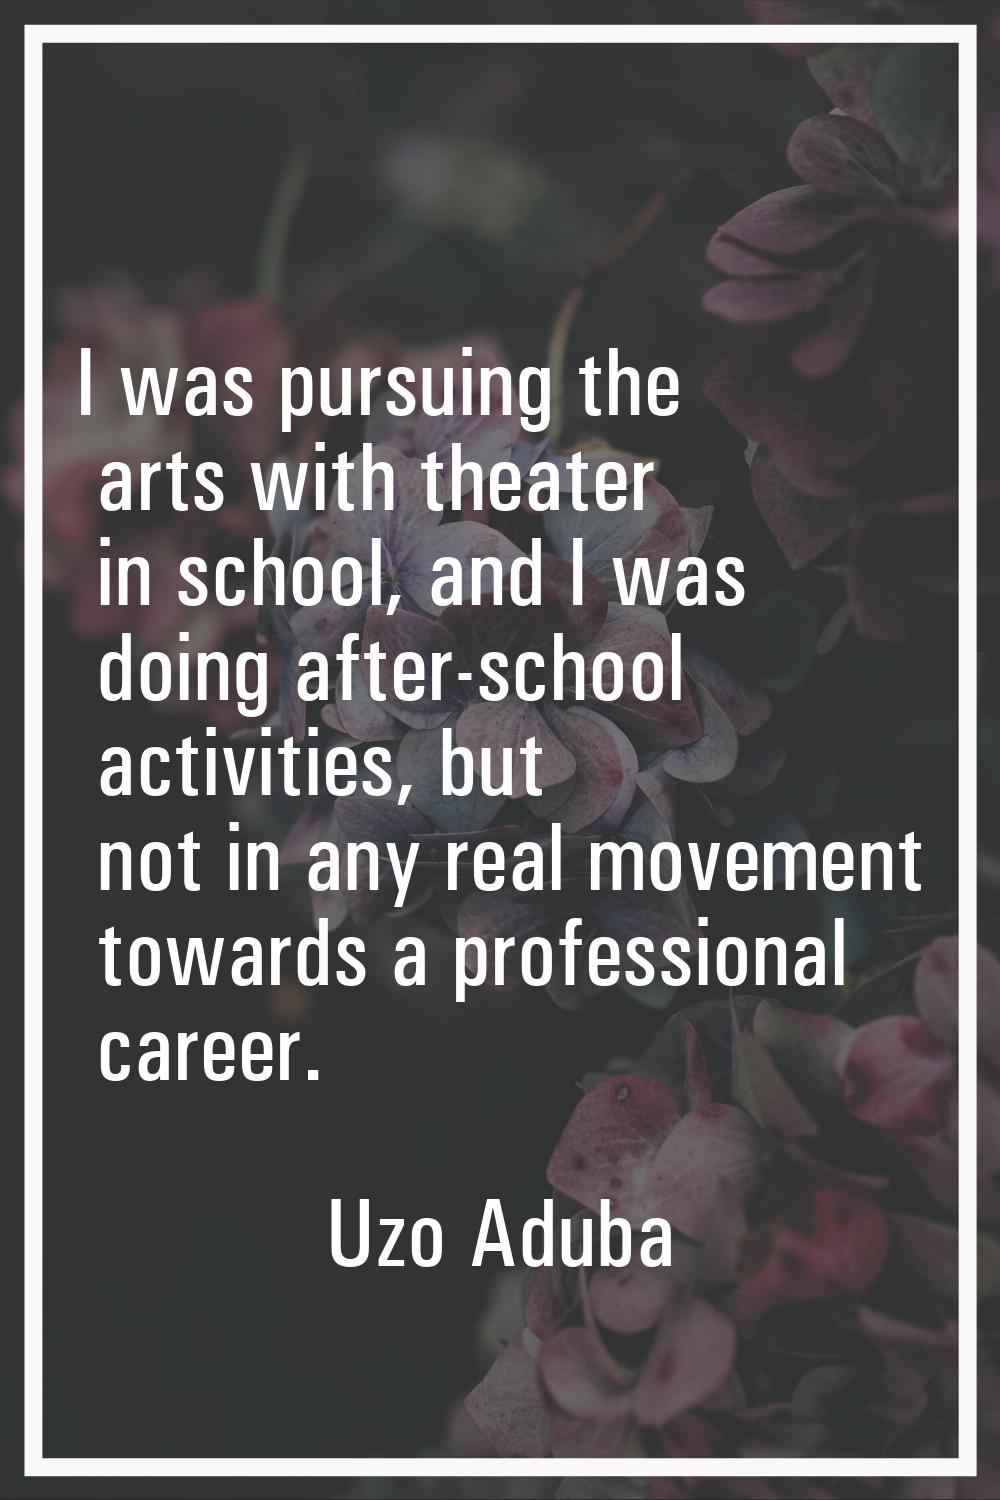 I was pursuing the arts with theater in school, and I was doing after-school activities, but not in